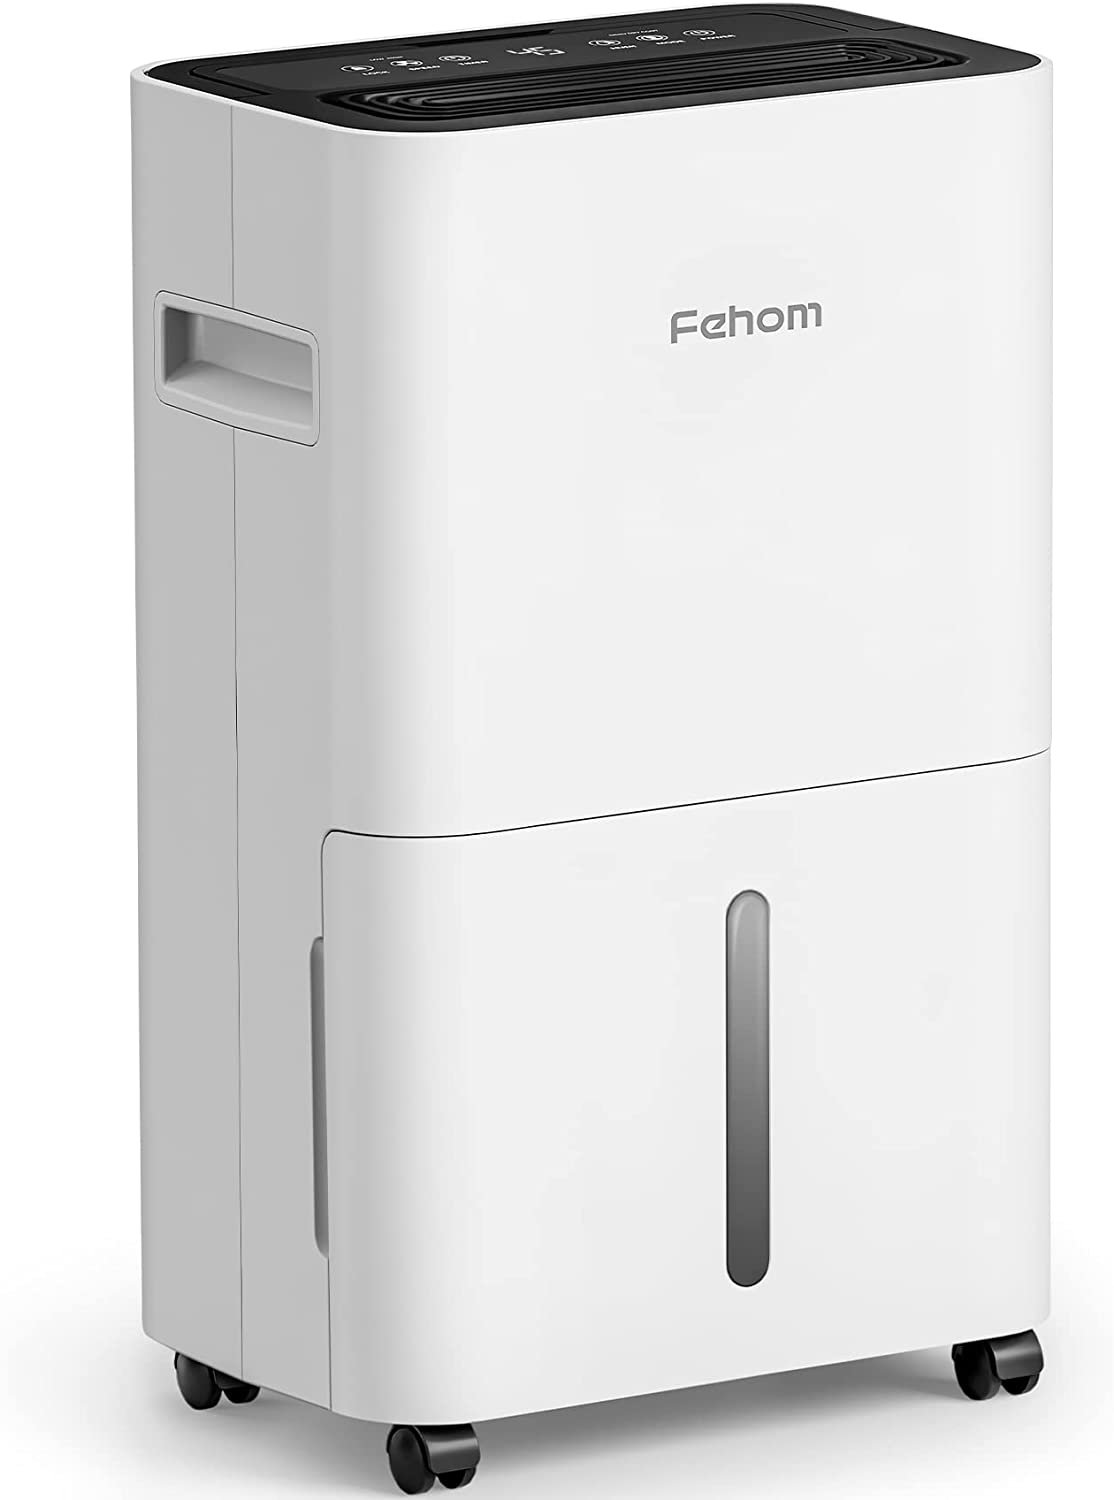 50 Pints Home Dehumidifier for Space up to 4,500 Sq. Ft with Auto Shut Off Humidity Control and Drain Hose (Model: PD11A)